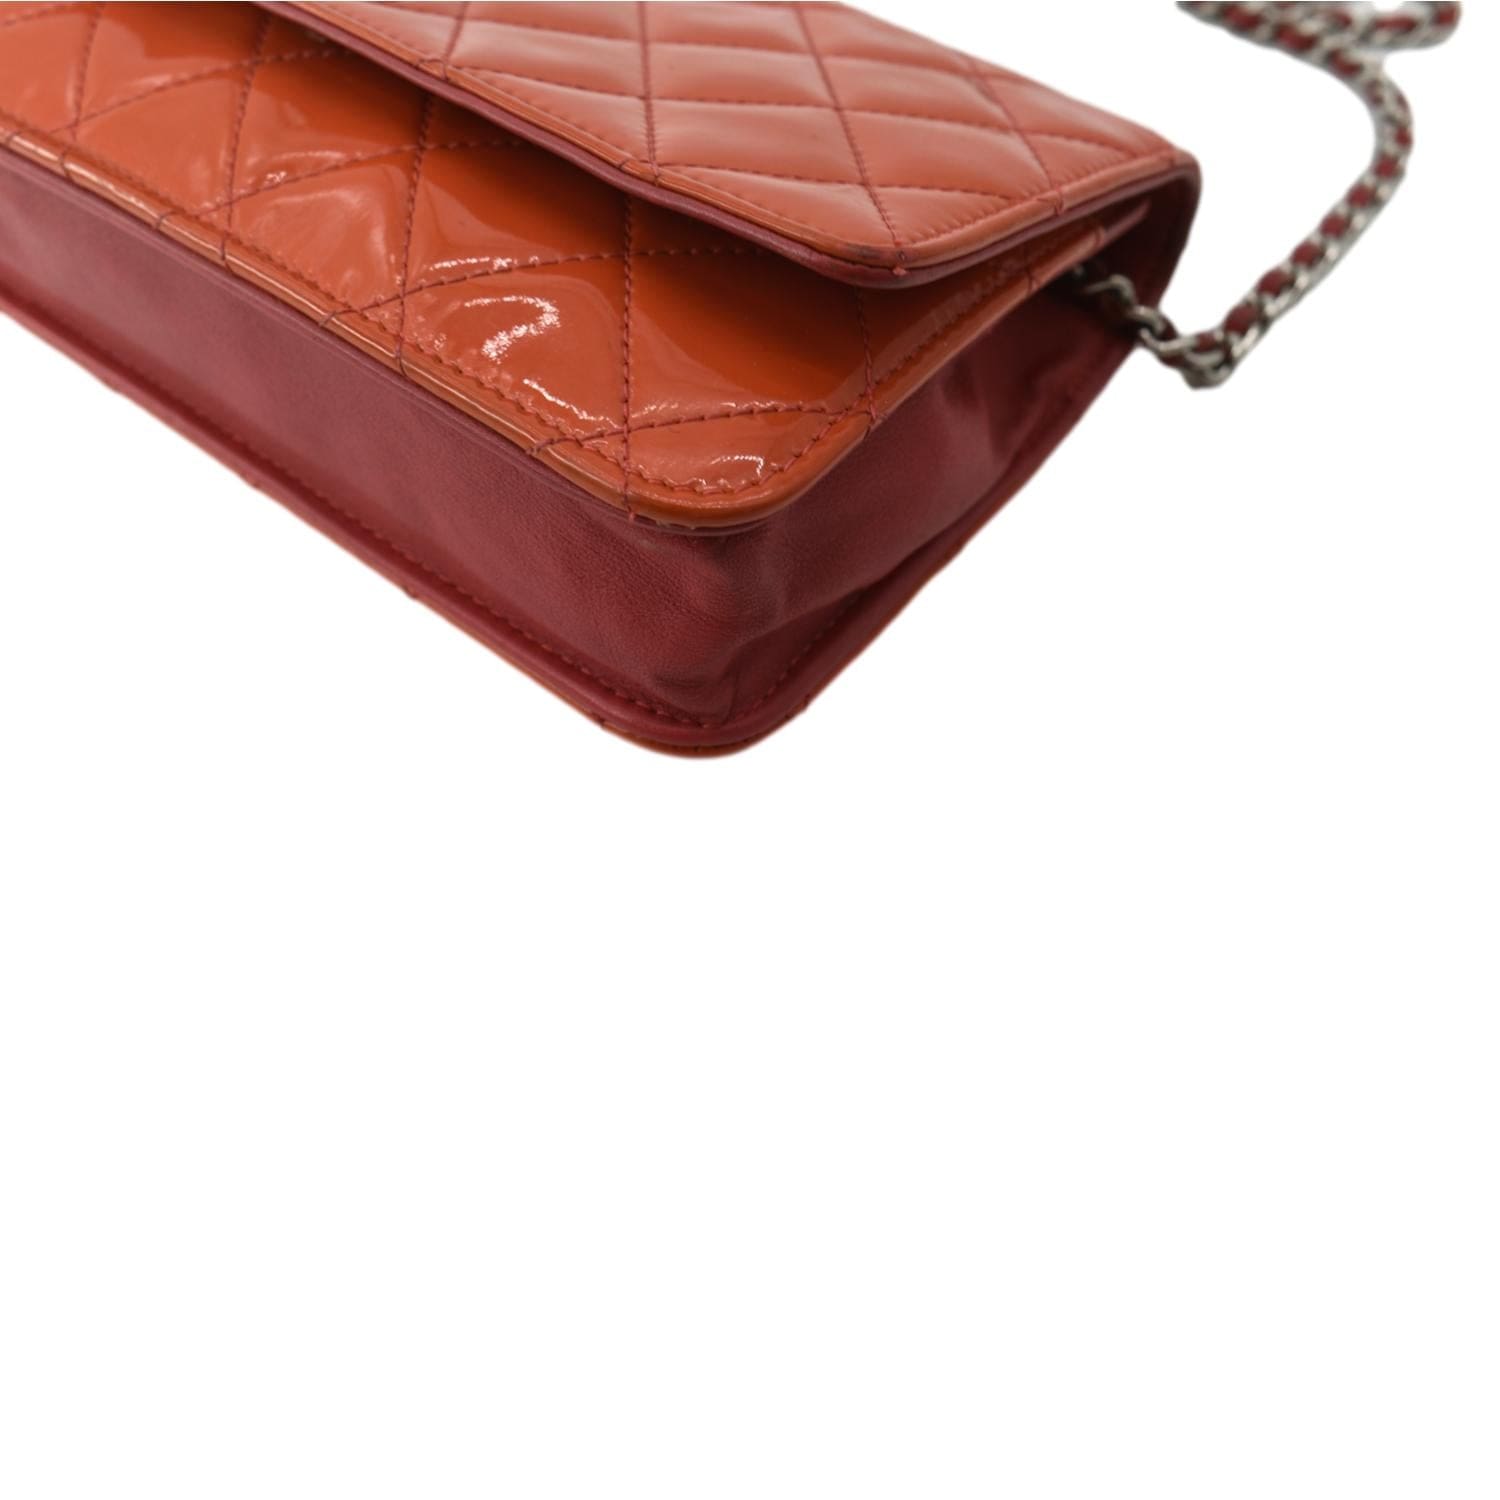 AUTHENTIC CHANEL RED Patent Leather Wallet on Chain WOC Messenger Clutch Bag  $1,825.00 - PicClick